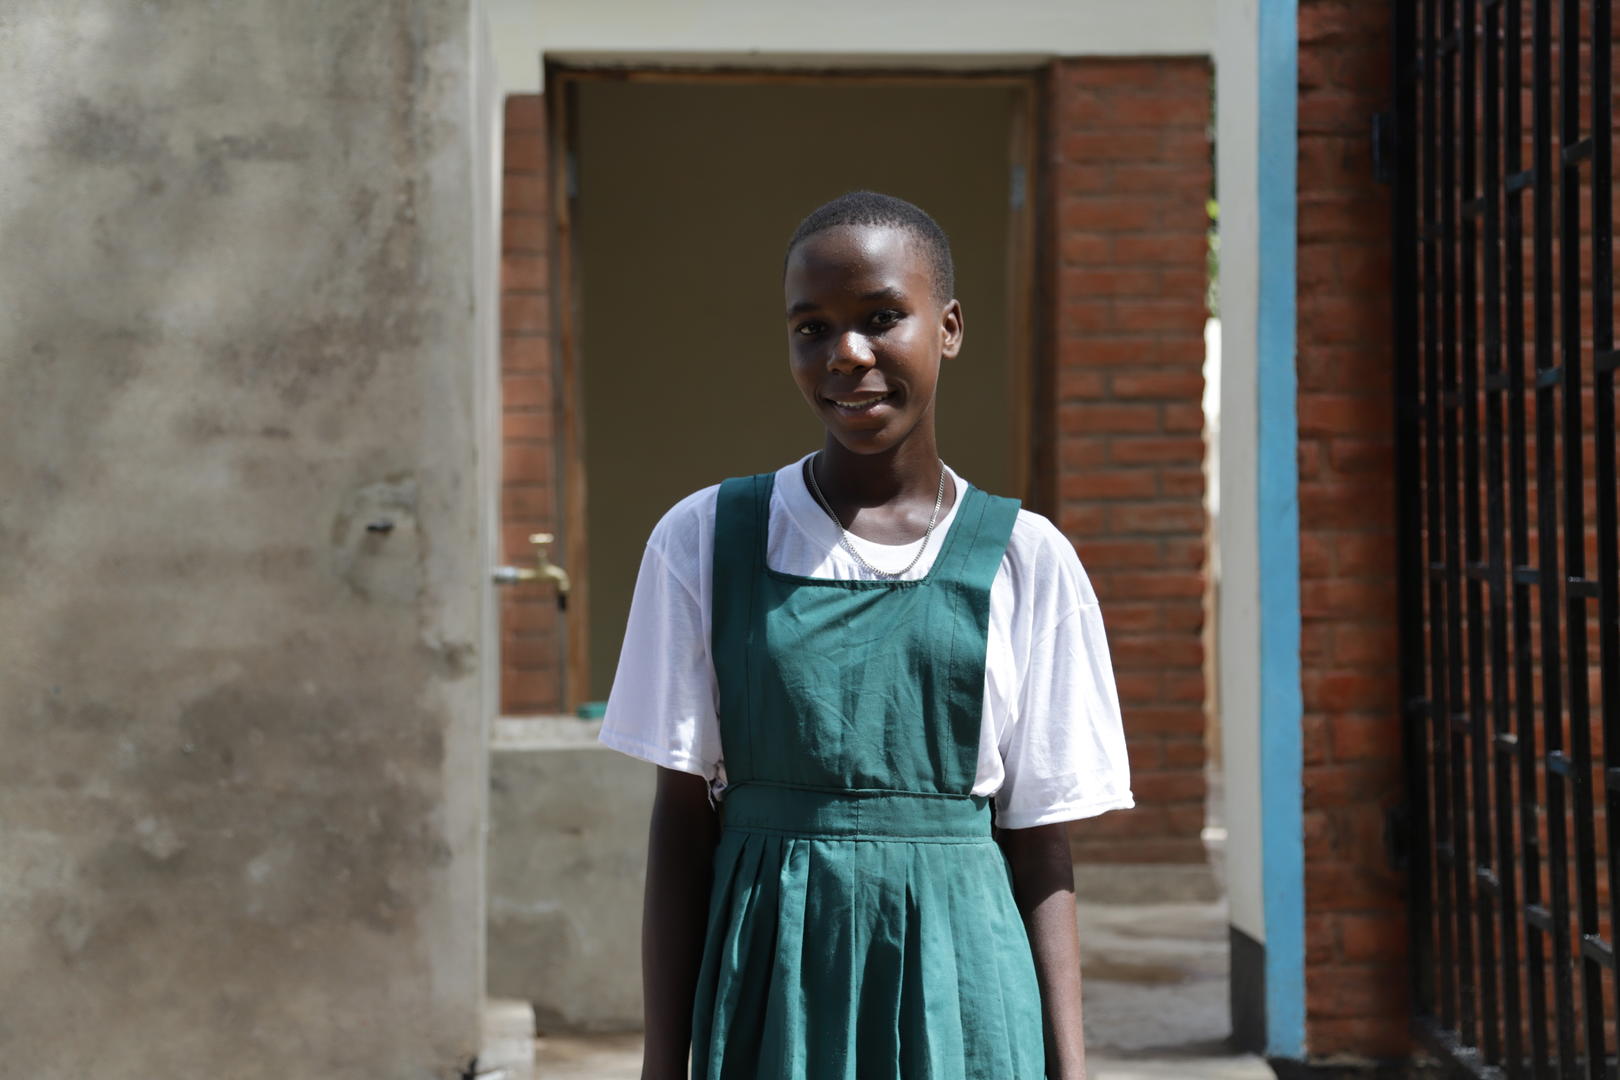 Mary, a young black girl, stands smiling at the camera